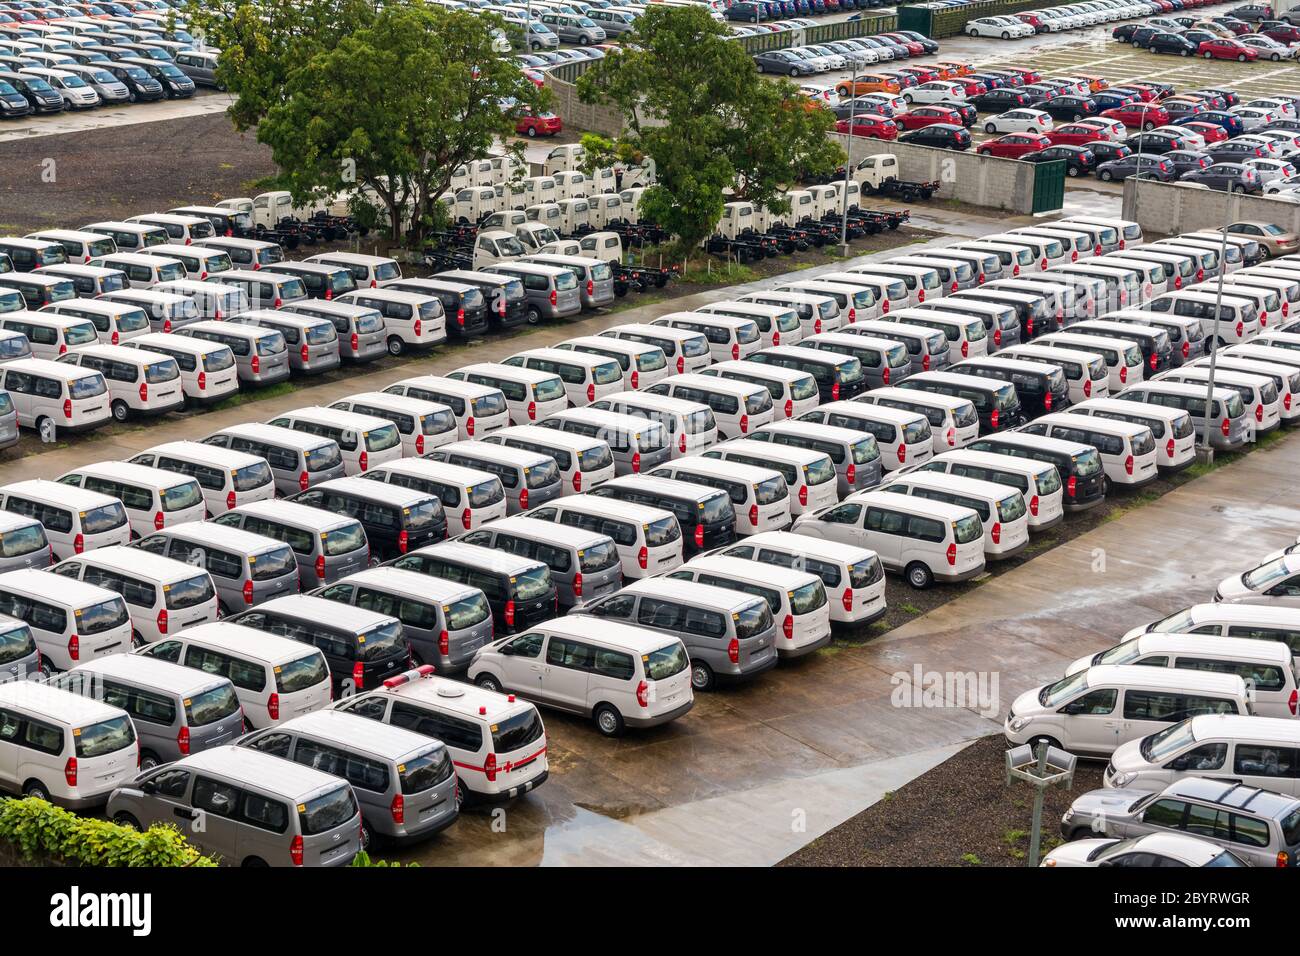 Calamba Laguna/ Philippines- 29 May 2015: vans and cars parked on car dealer compound Stock Photo